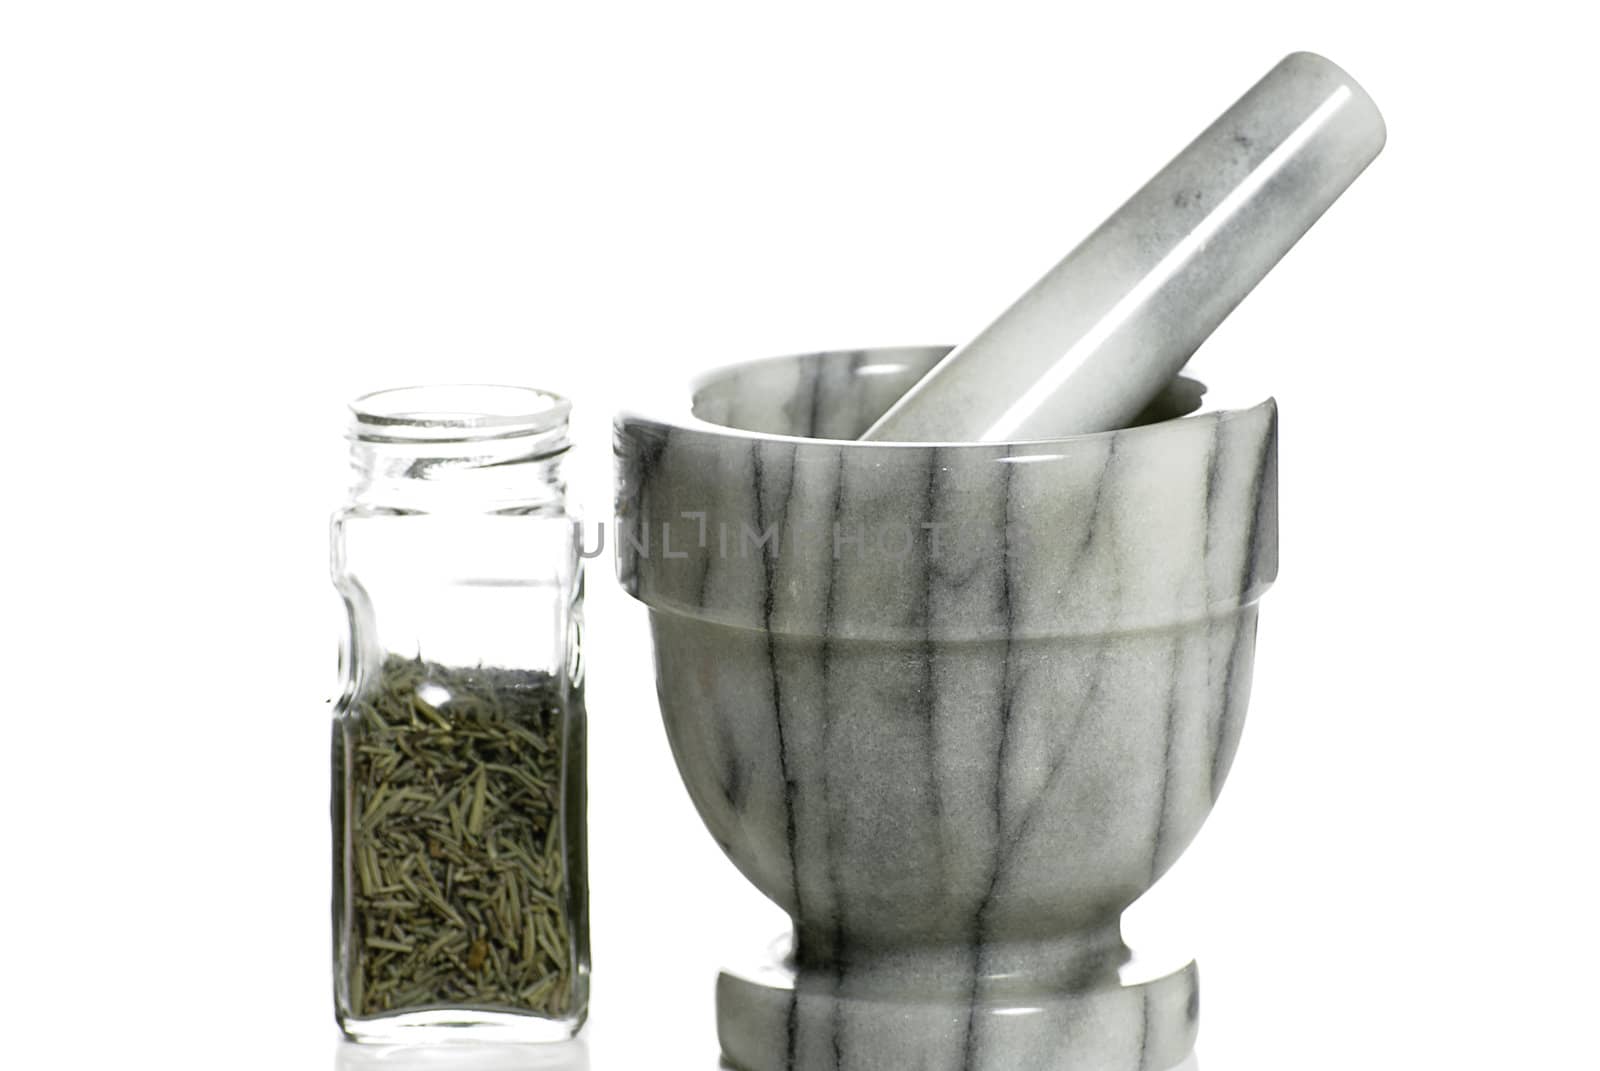 A marble mortar and pestle used to grind spices is isolated against a white background.